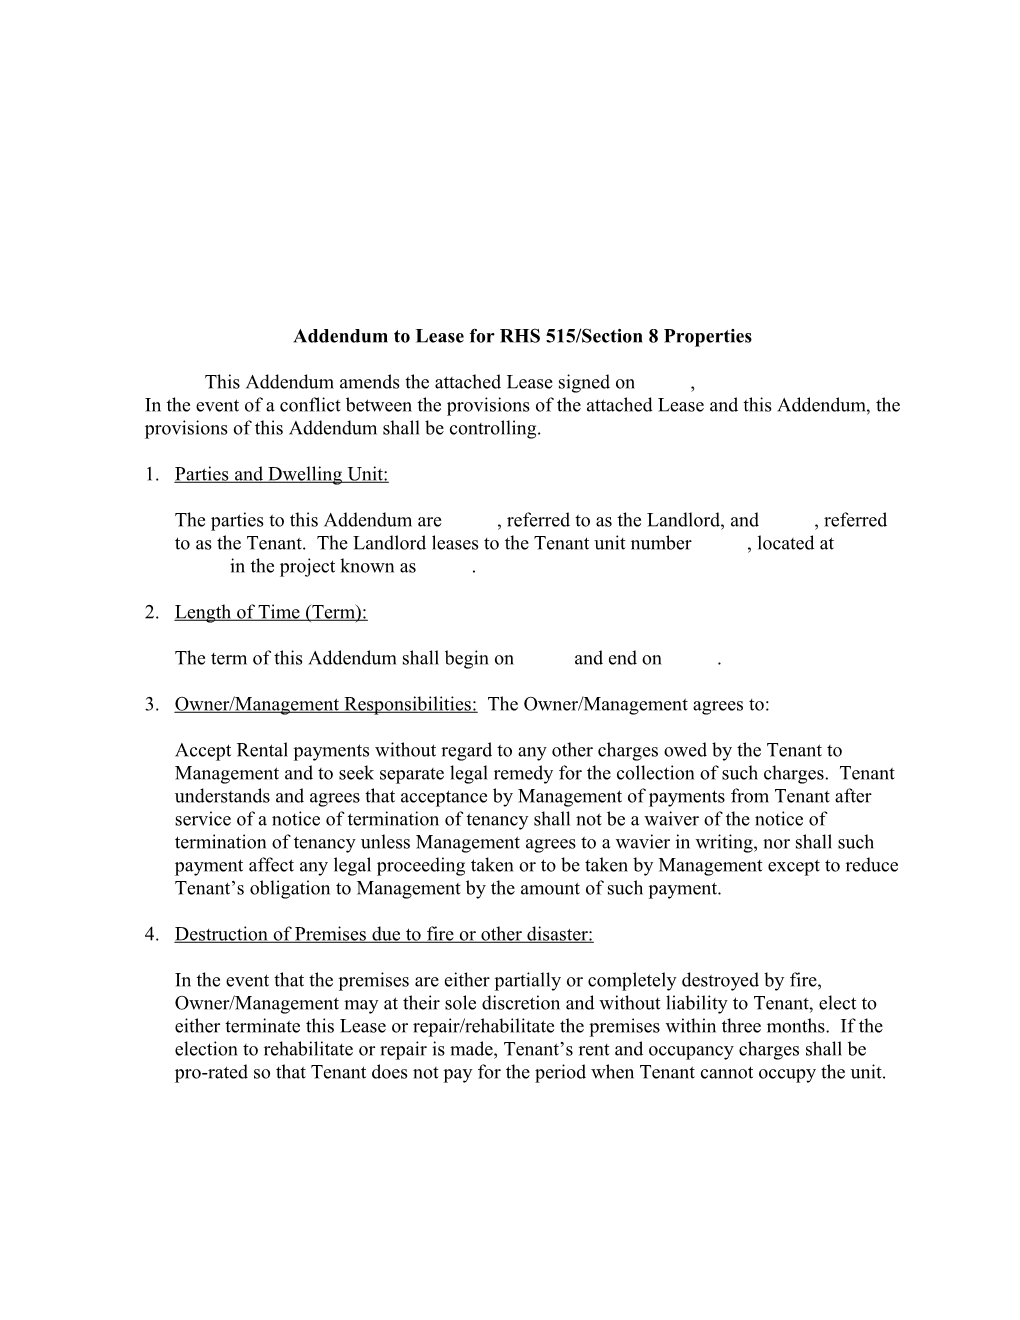 Addendum to Lease for RHS 515/Section 8 Properties